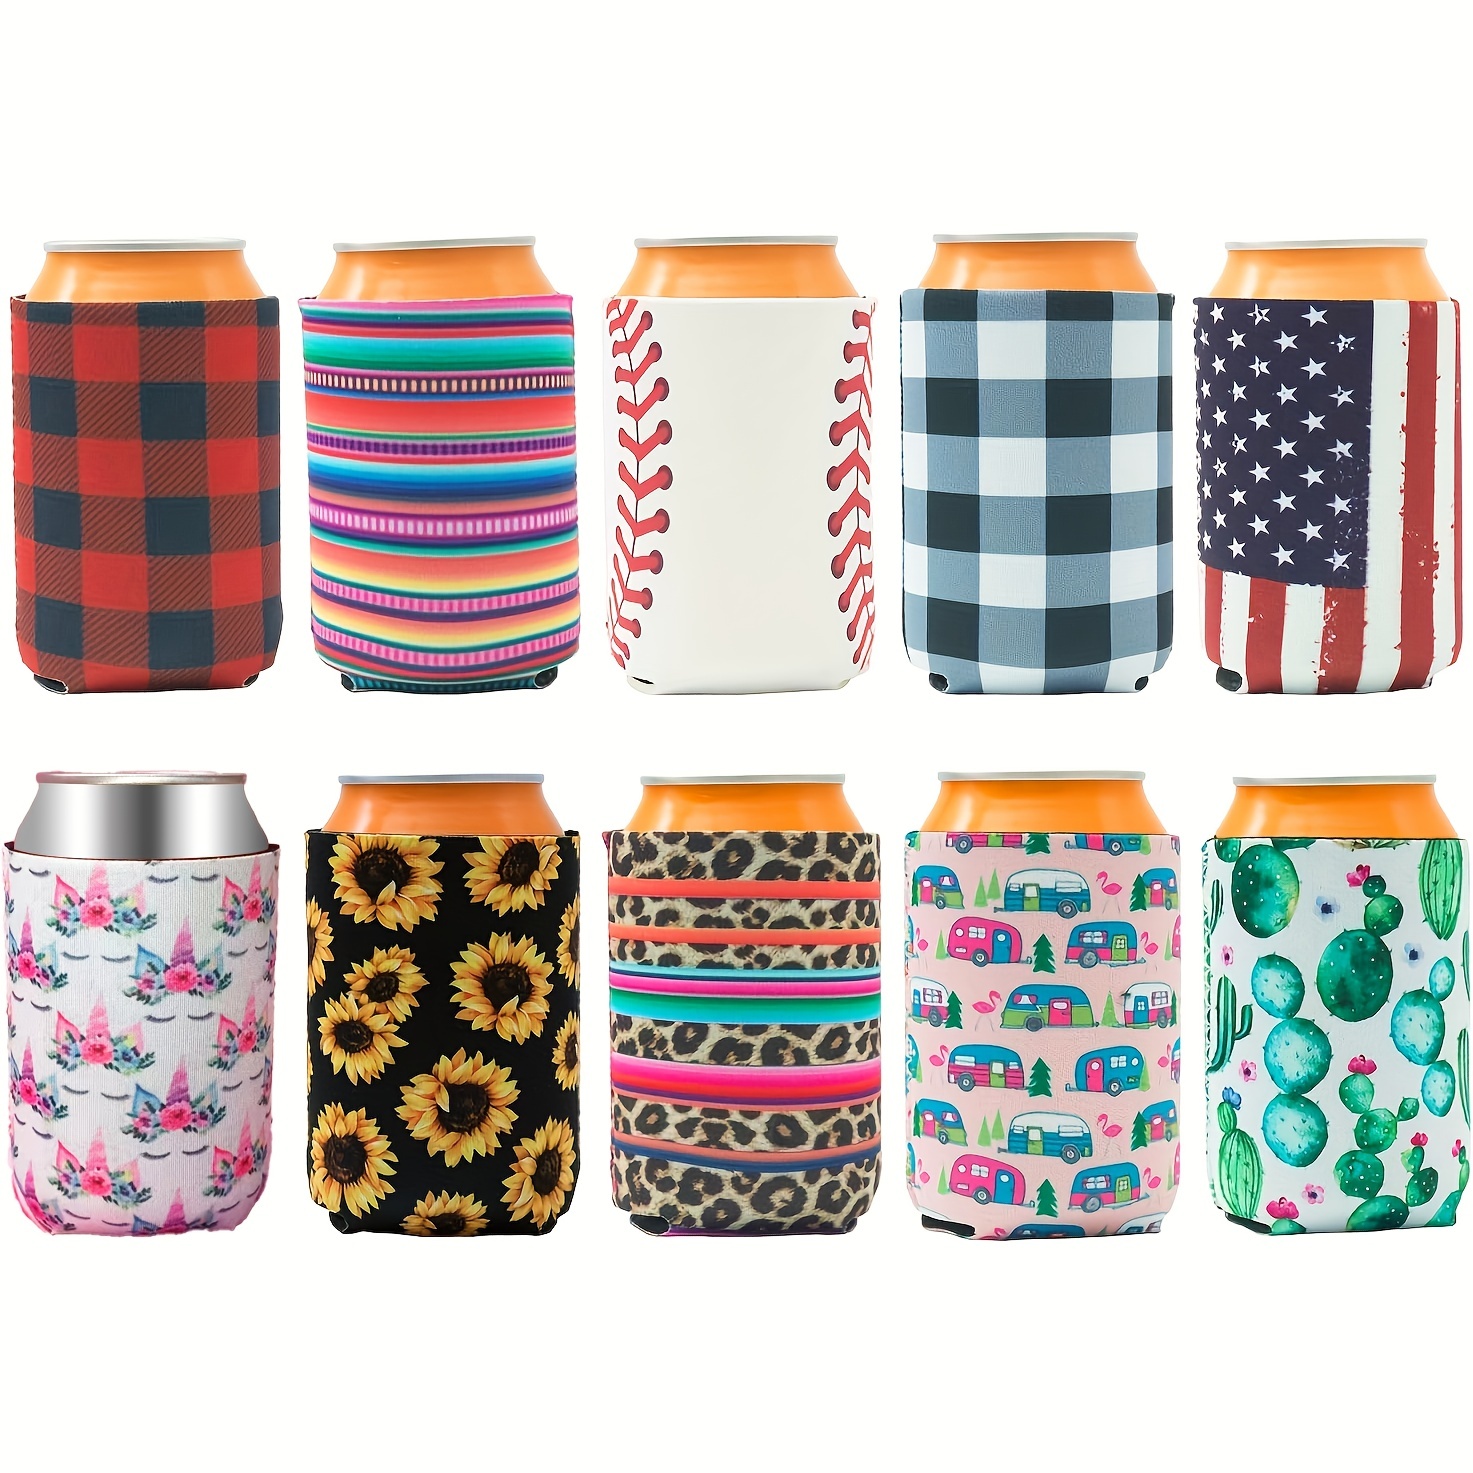 Skinny Can Cooler For Slim Cans (12 Pcs) Slim Can Cooler Slim Can Insulator  Skinny Can Cooler Beer Coolers For Cans Slim Tall Can Cooler Can Coolers